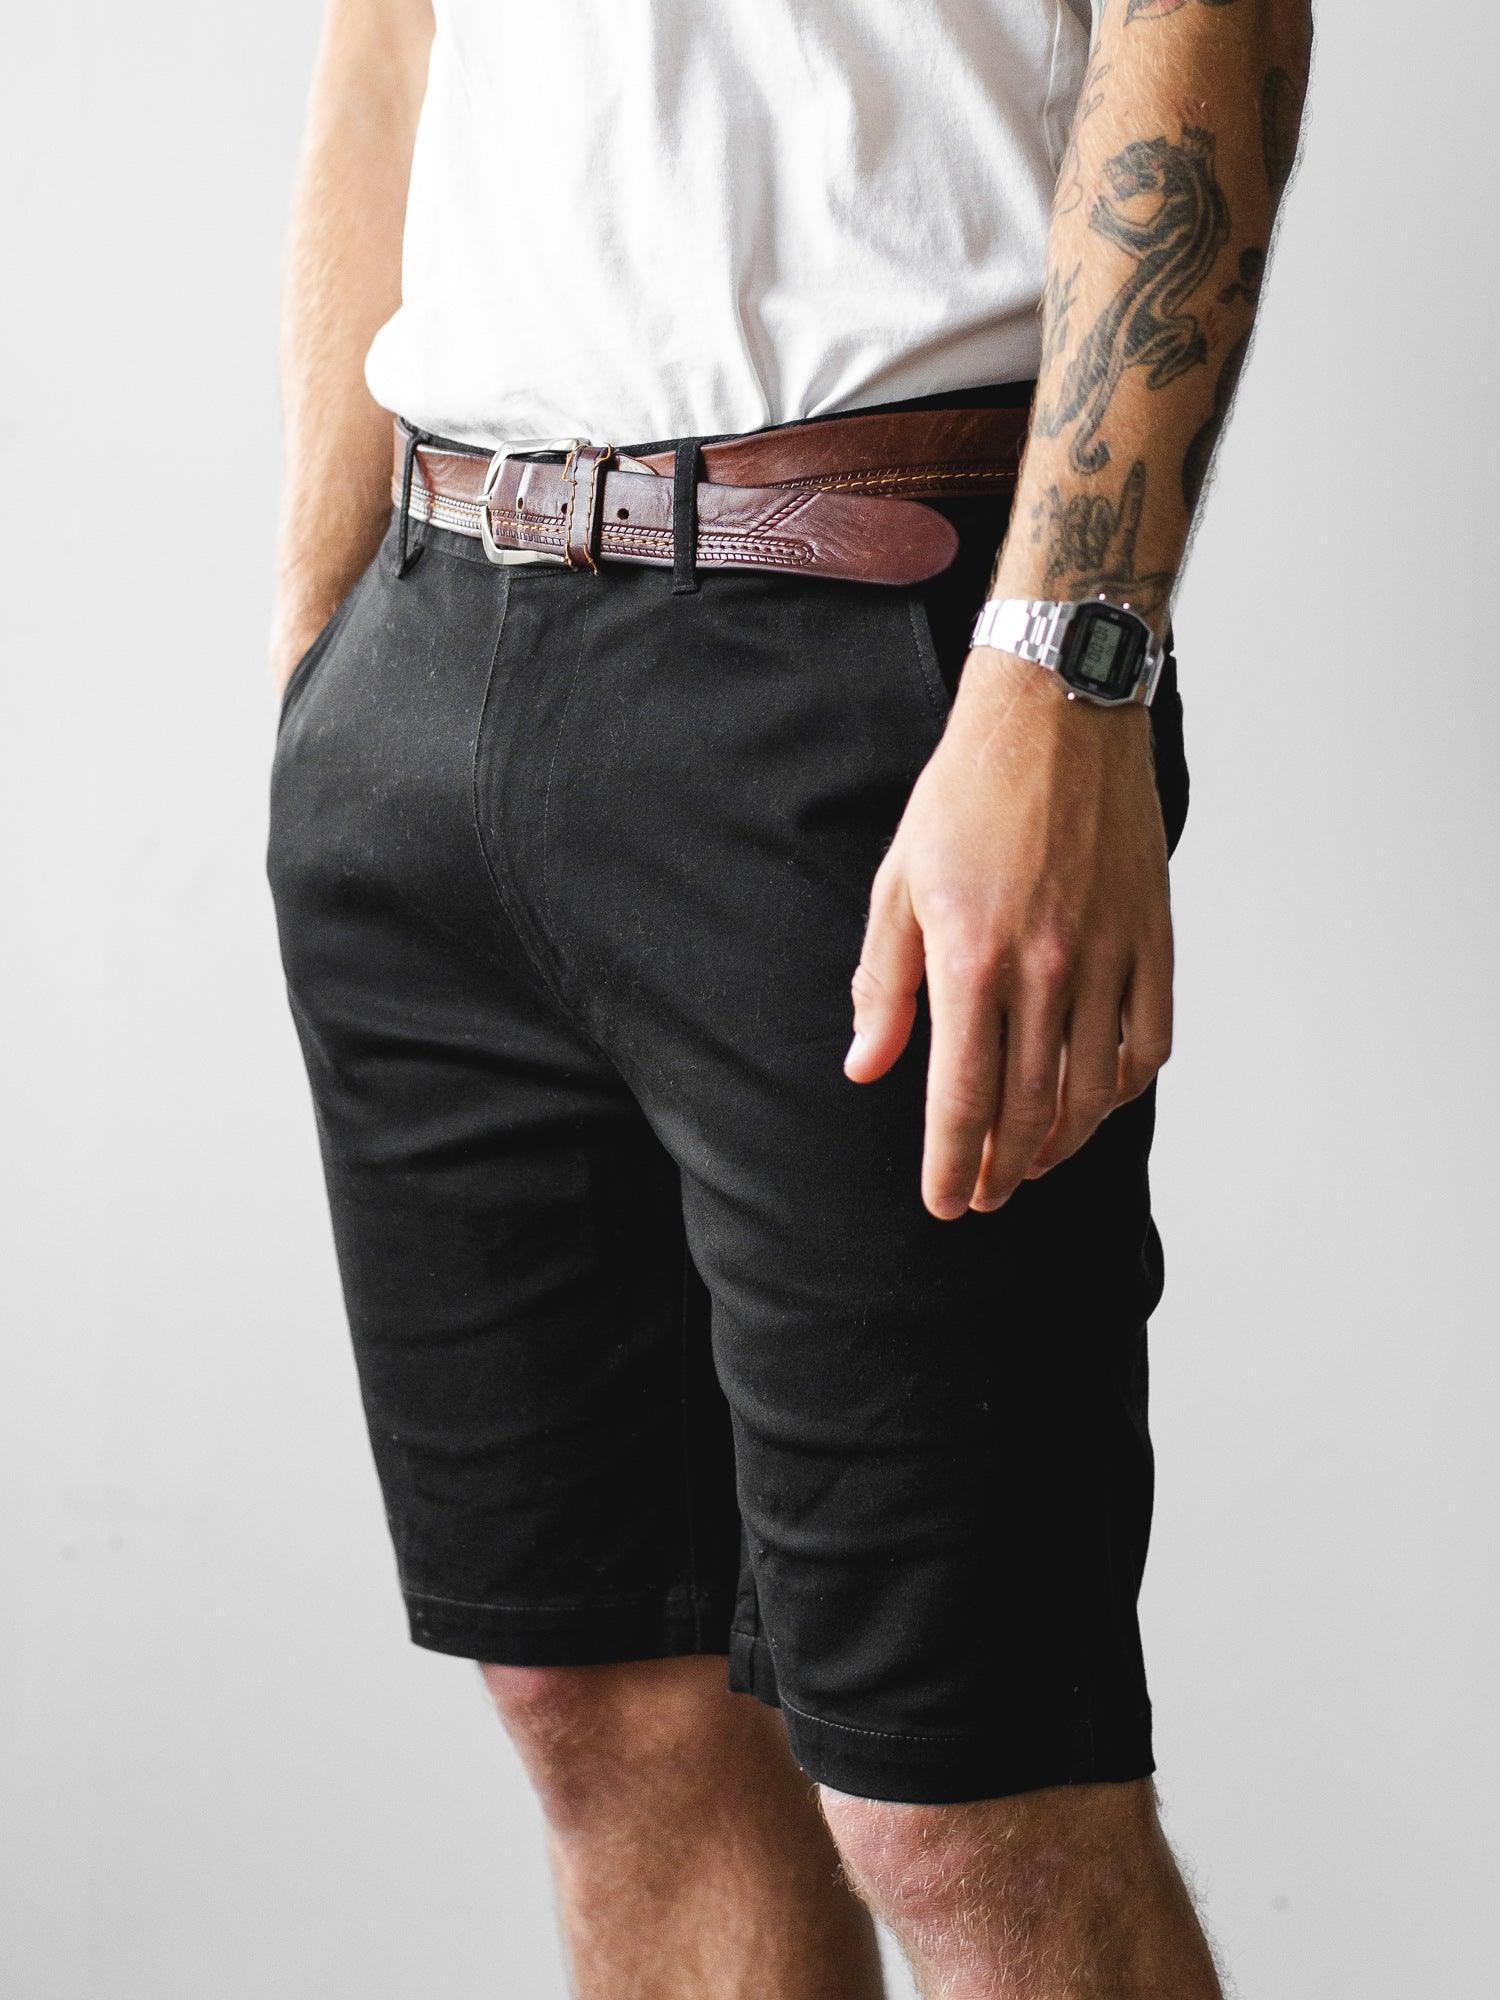 Watershed Brand Standard Issue Shorts - Black - classic cotton black shorts